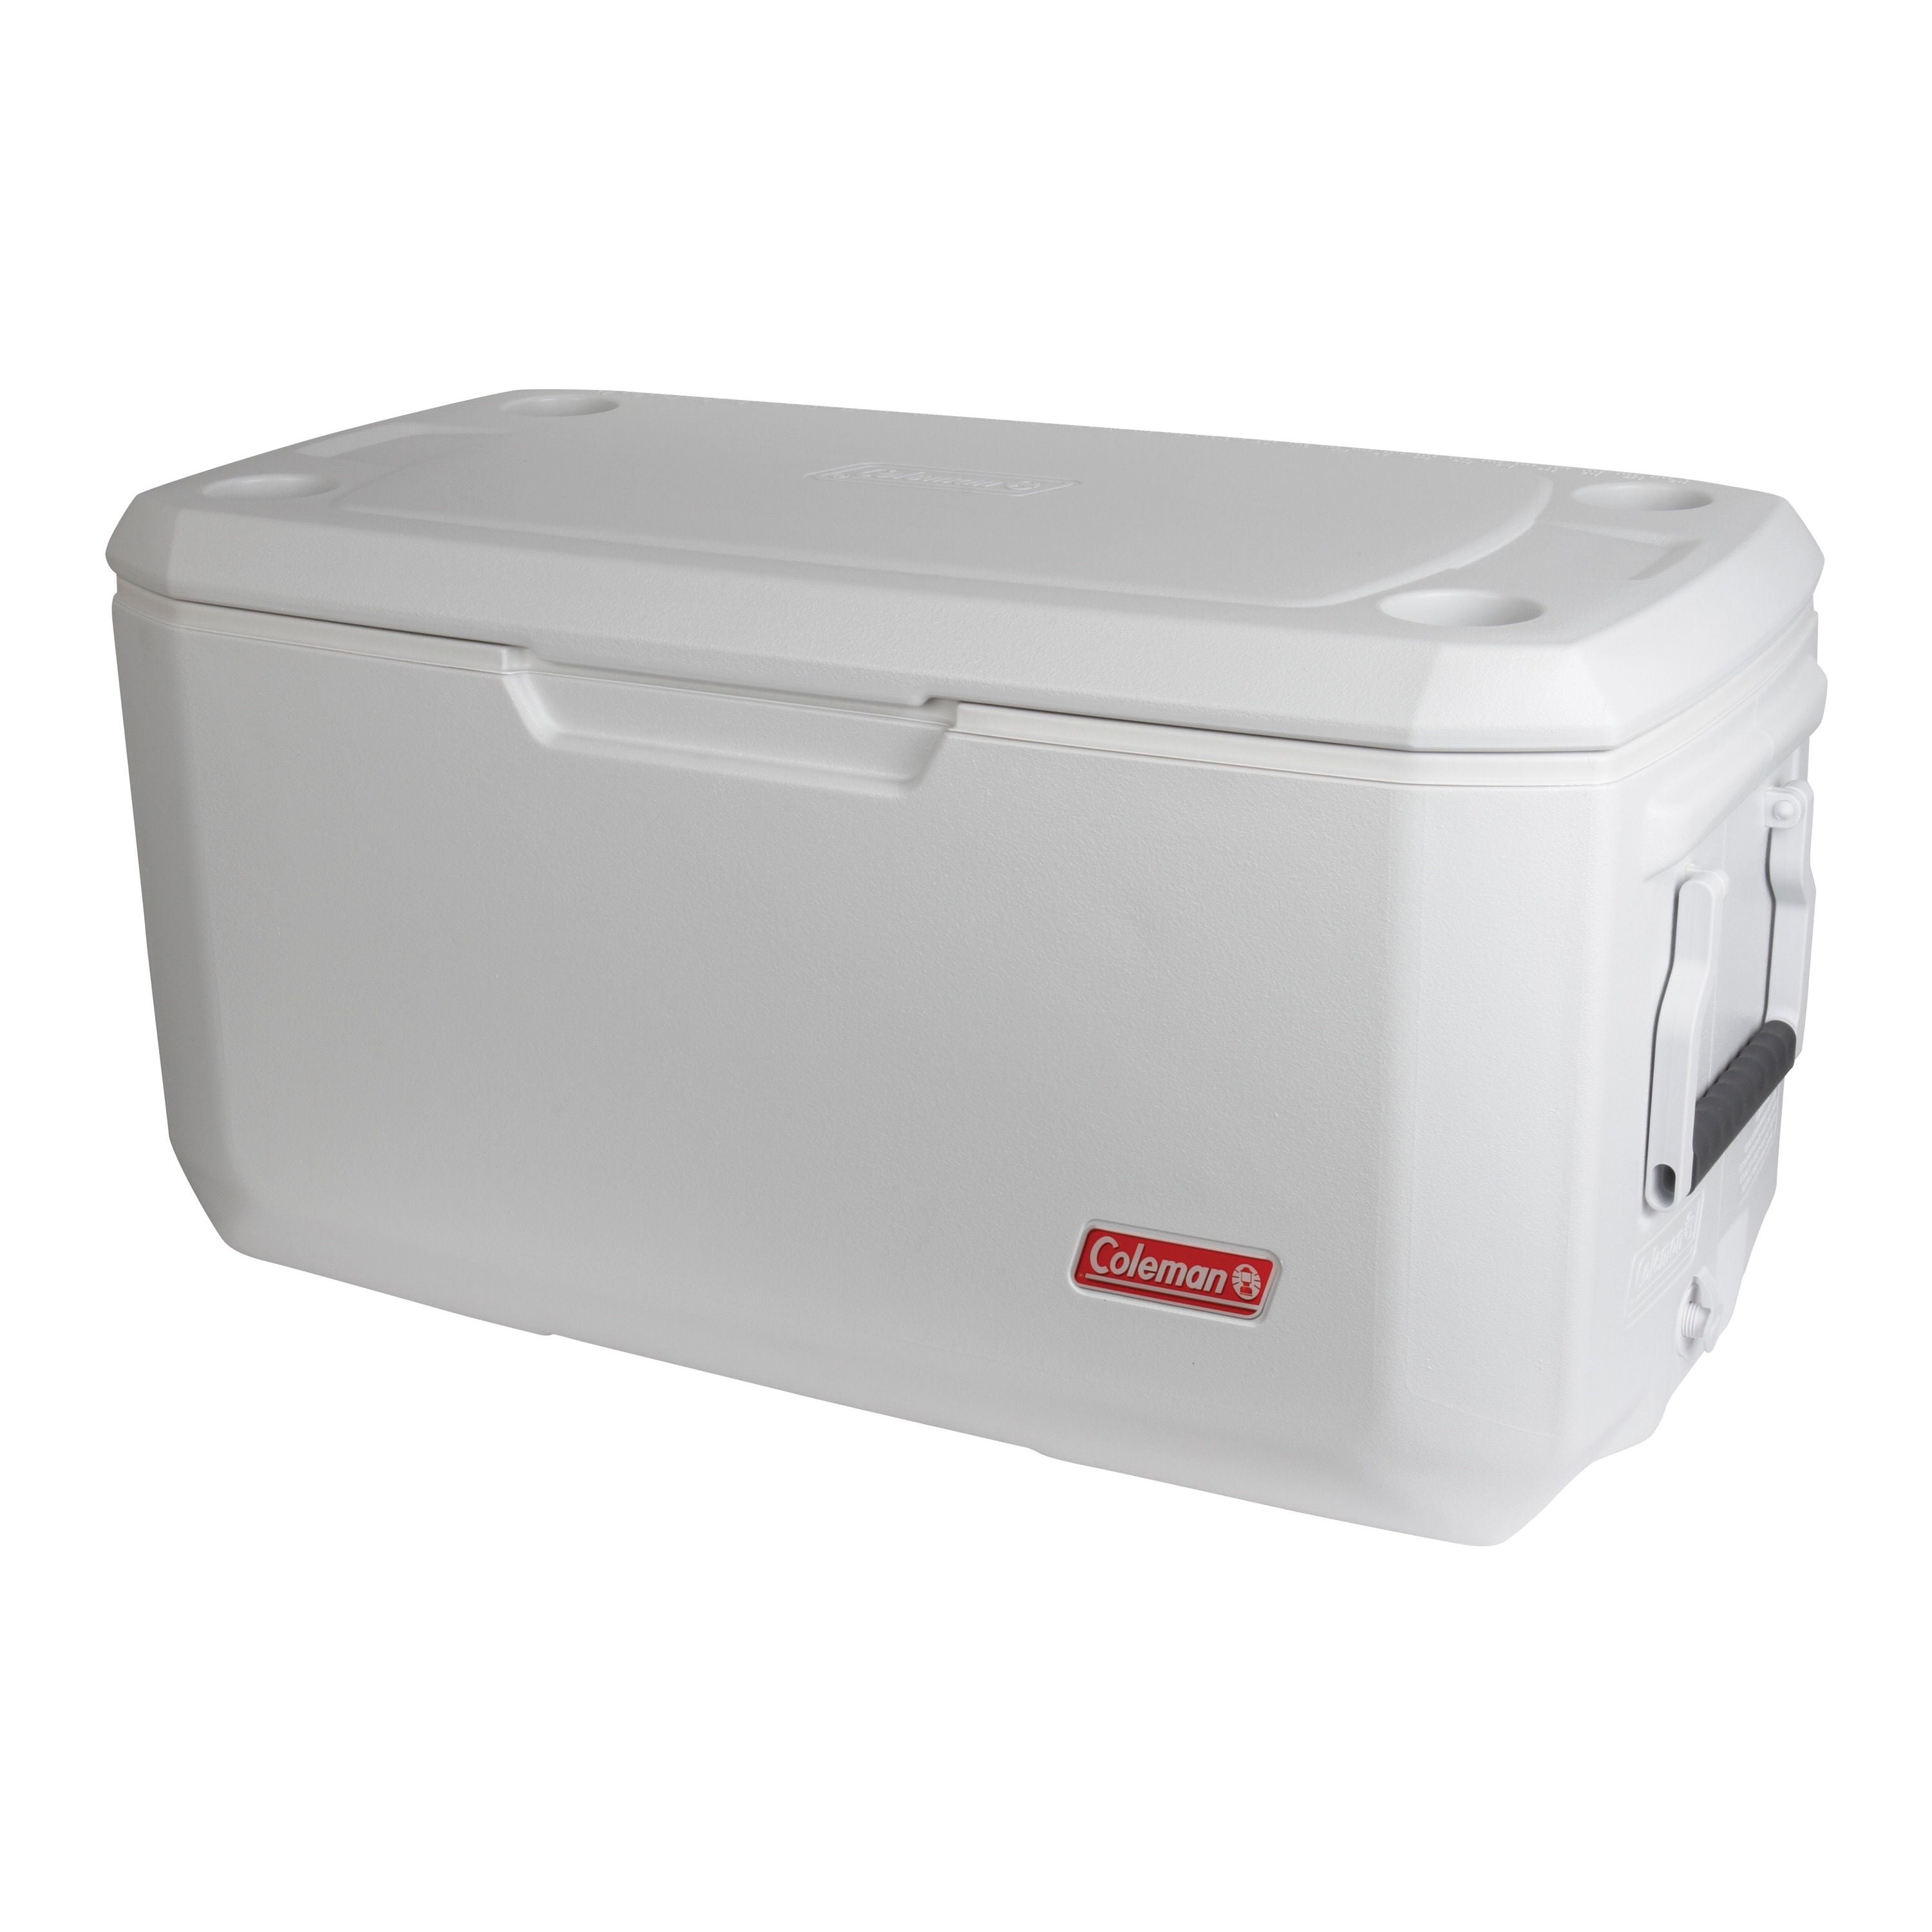 Marine Portable Cooler Outdoor Boating Fishing Insulated Wall Lid Ice Box 120 Qt 